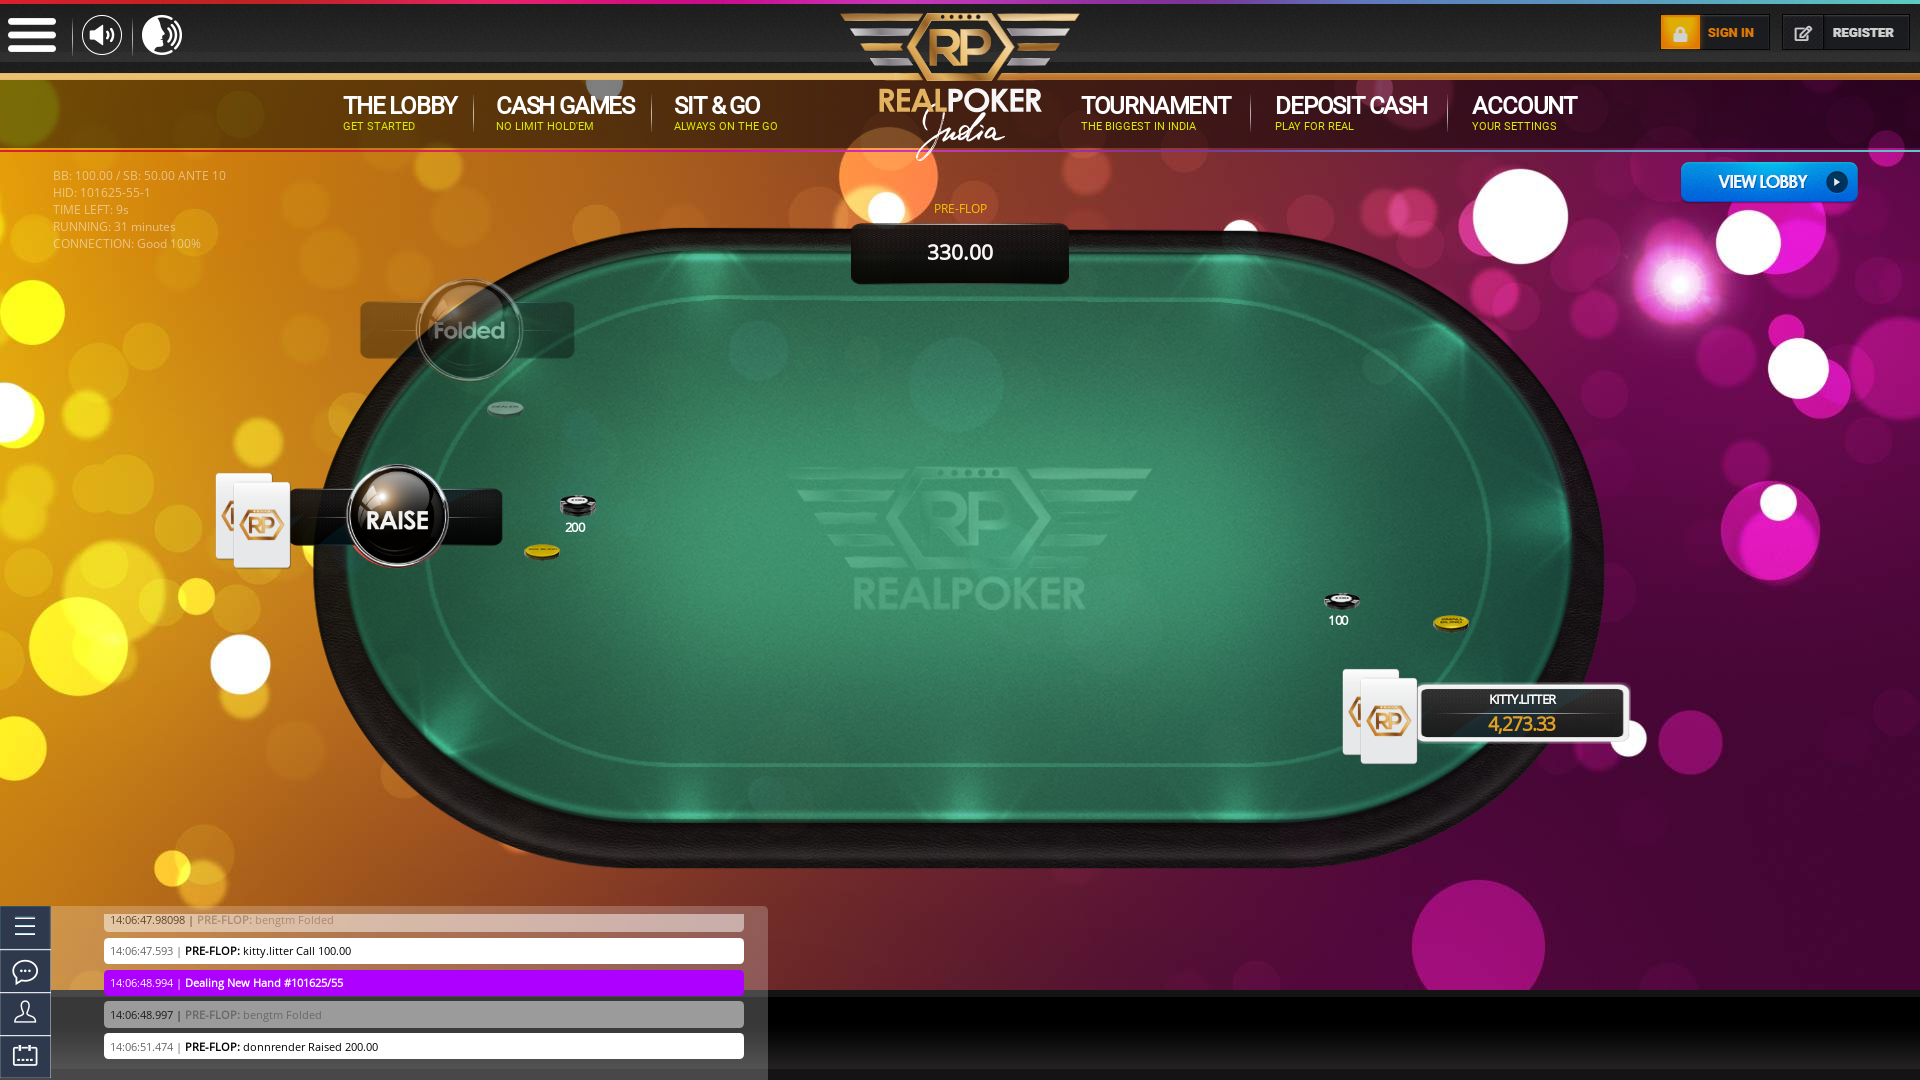 Real poker 10 player table in the 30th minute